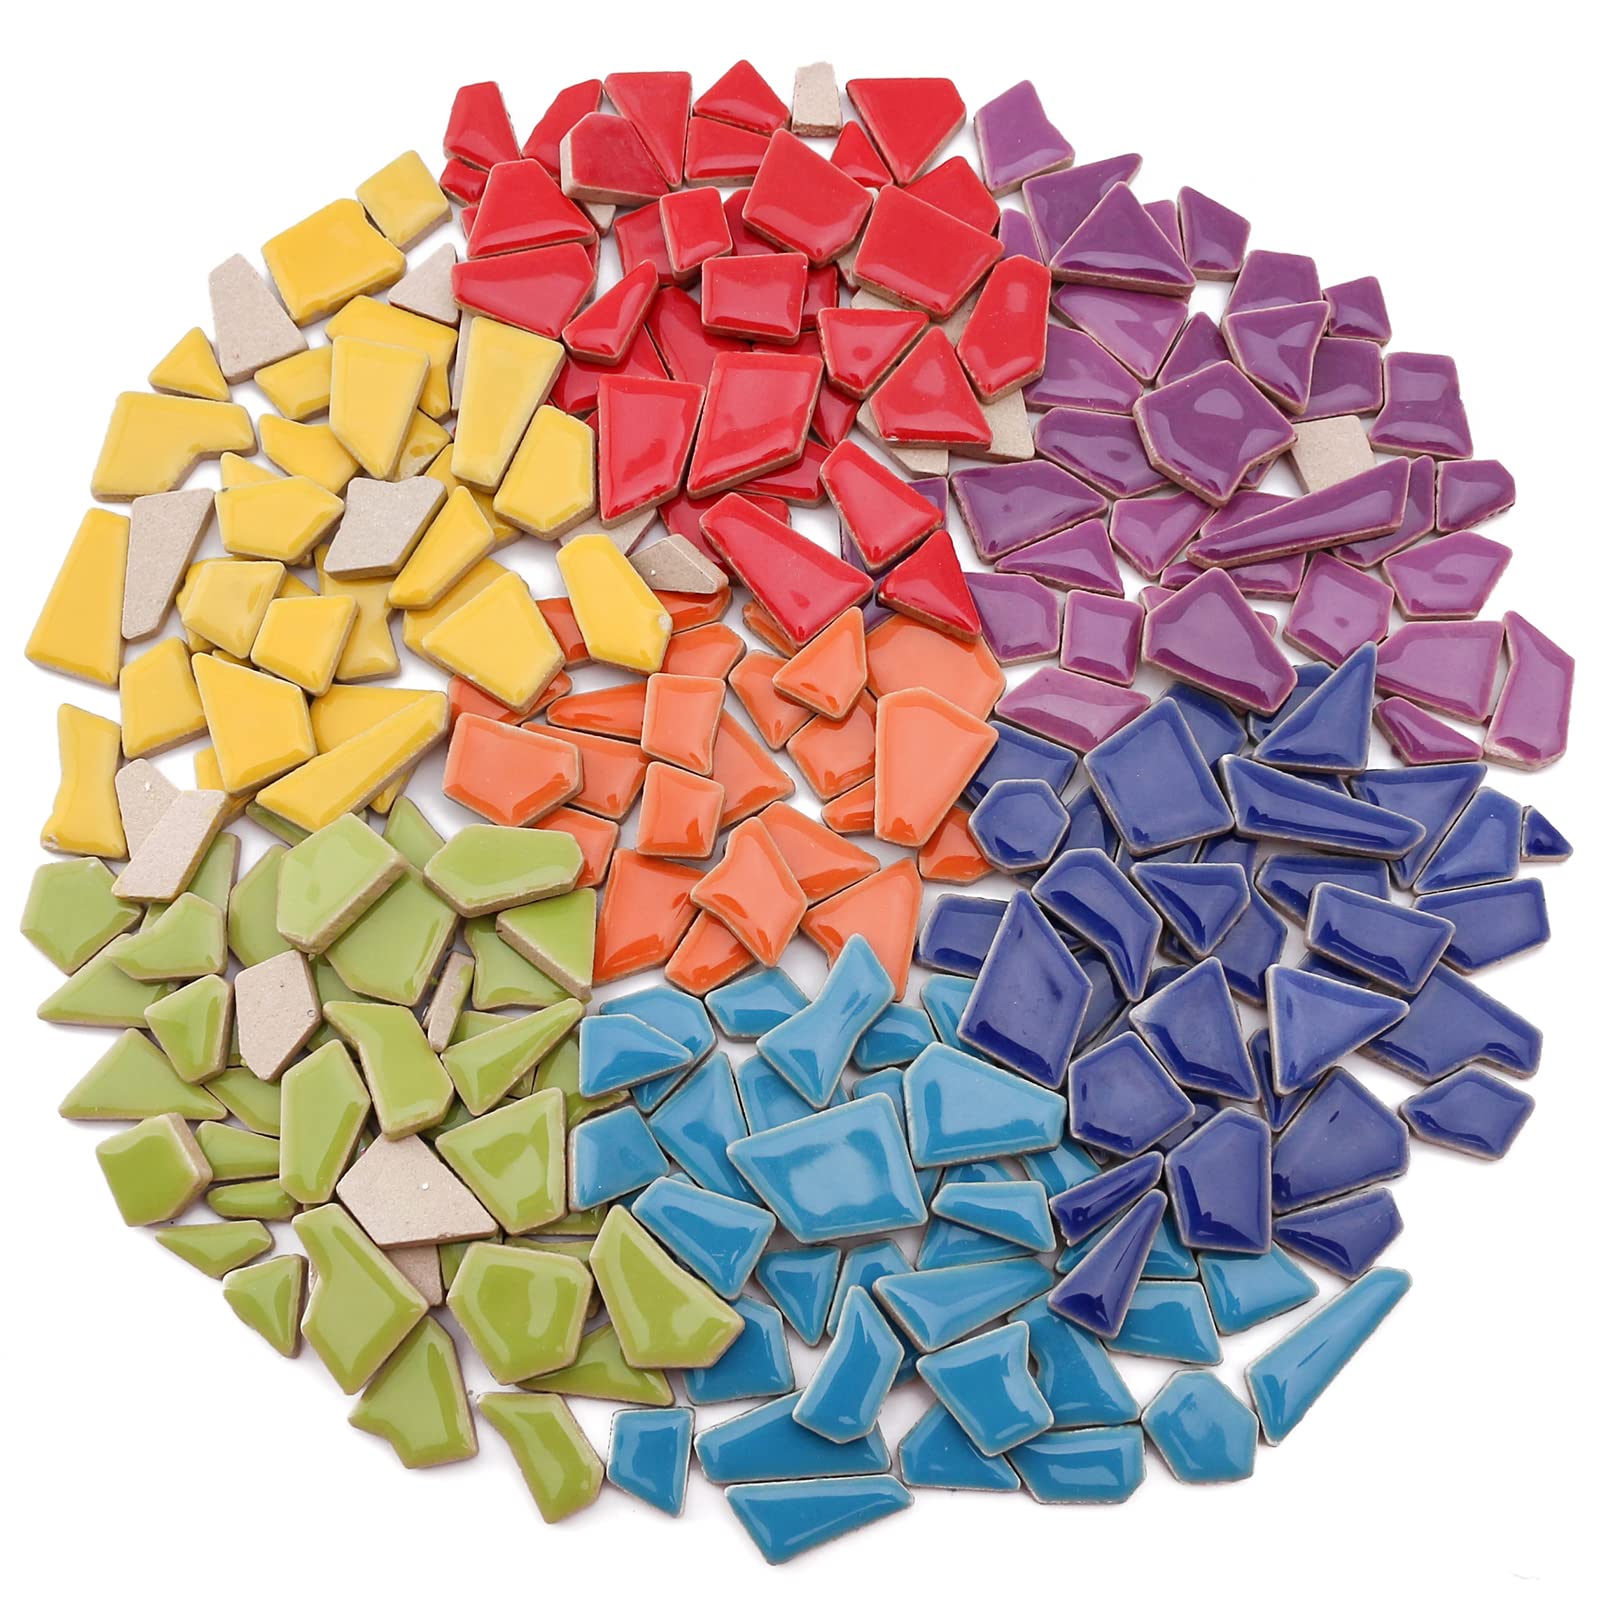 Youway Style 454g Ceramic Mosaic Tiles for Crafts Bulk Broken Tiles Pieces for Mosaic Craft Supplies Mosaic Kits(Mixed Colors 1 pound) Multicolor